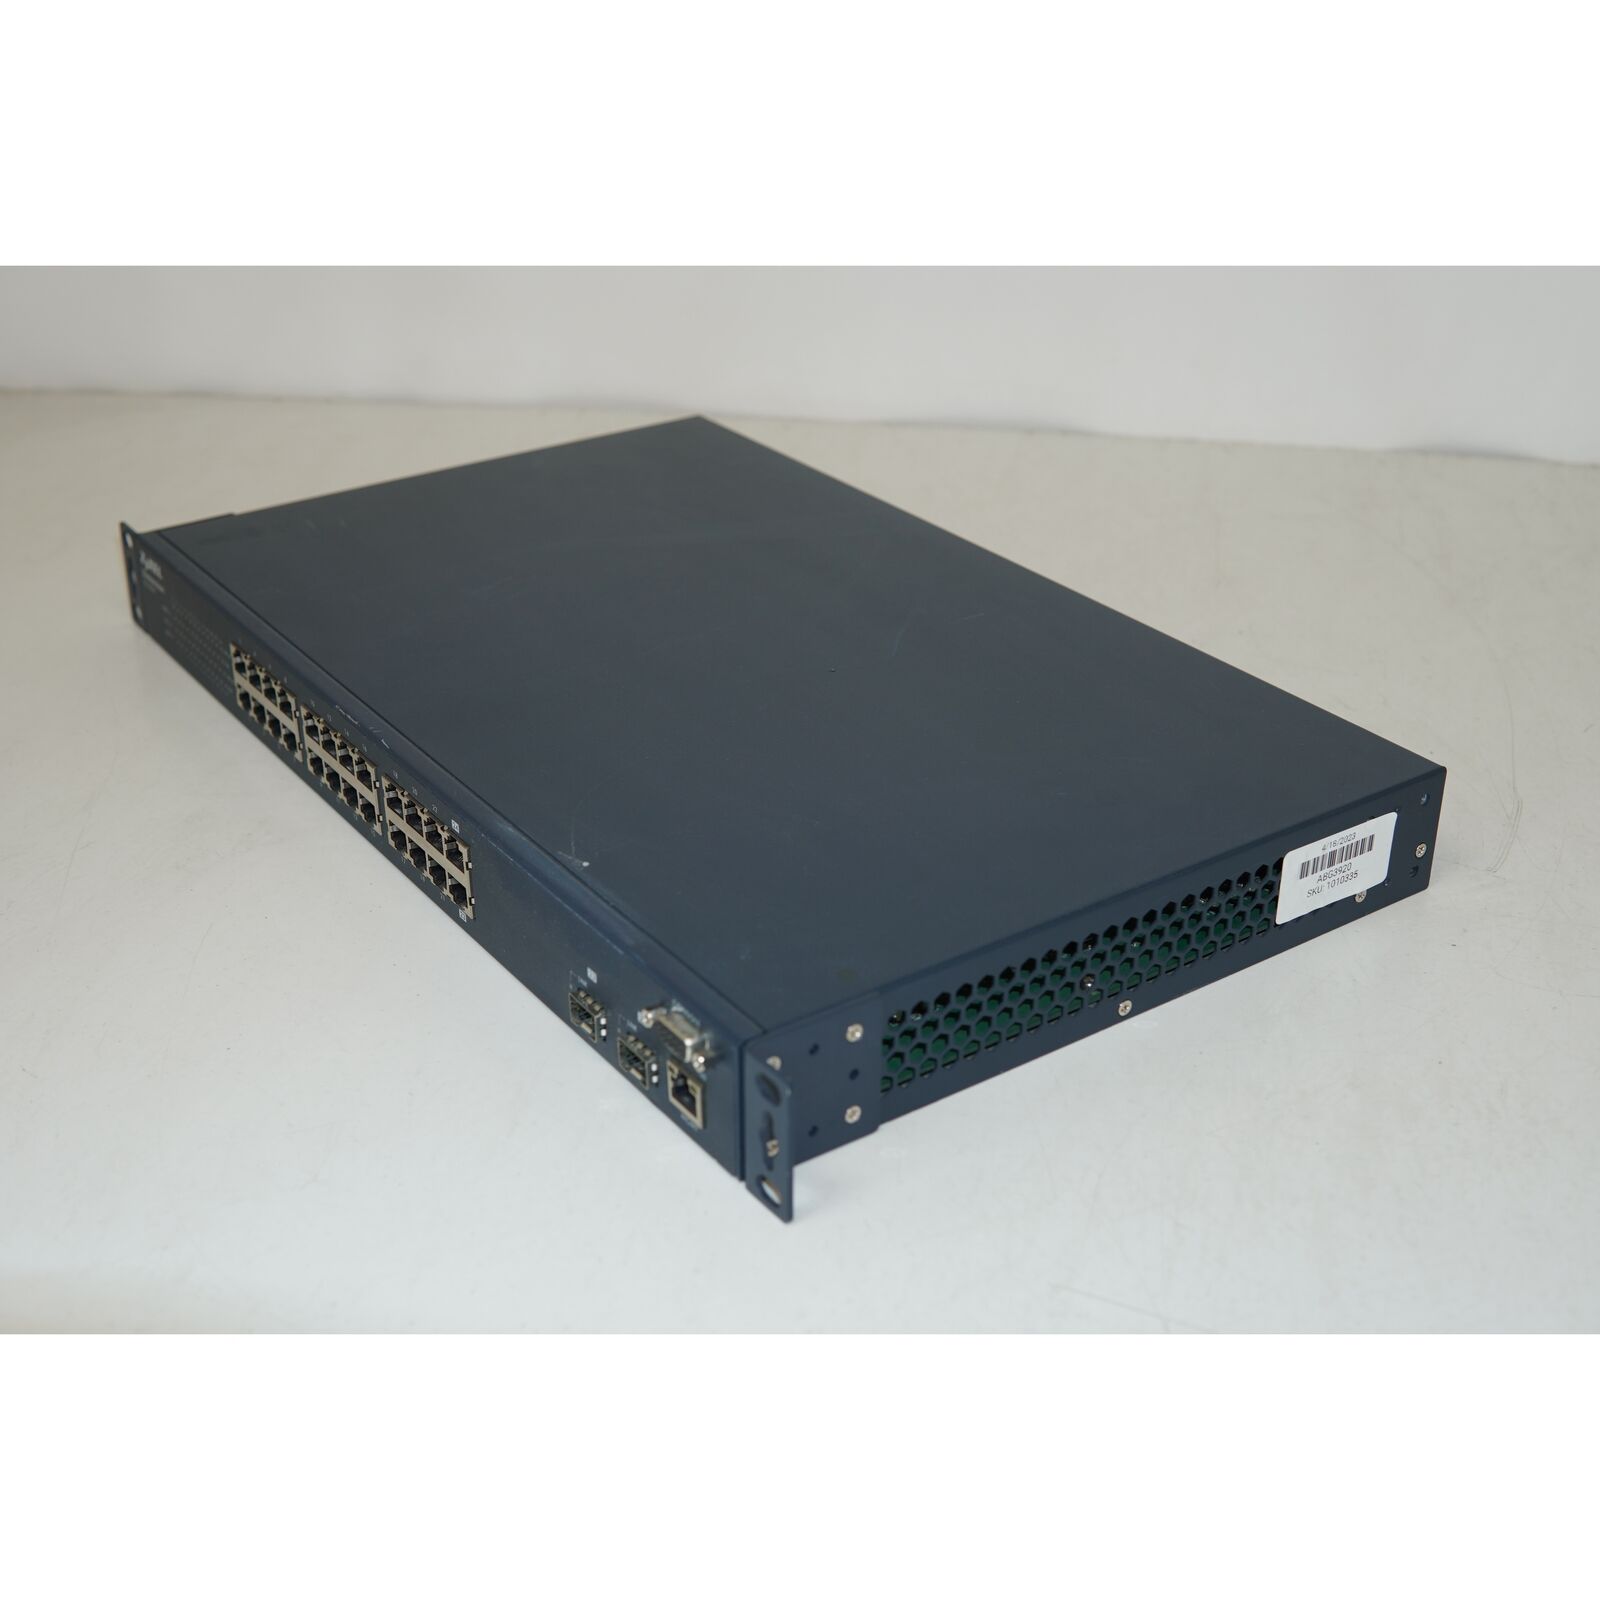 Zyxel GS2024 Managed Networking Gigabit Switch